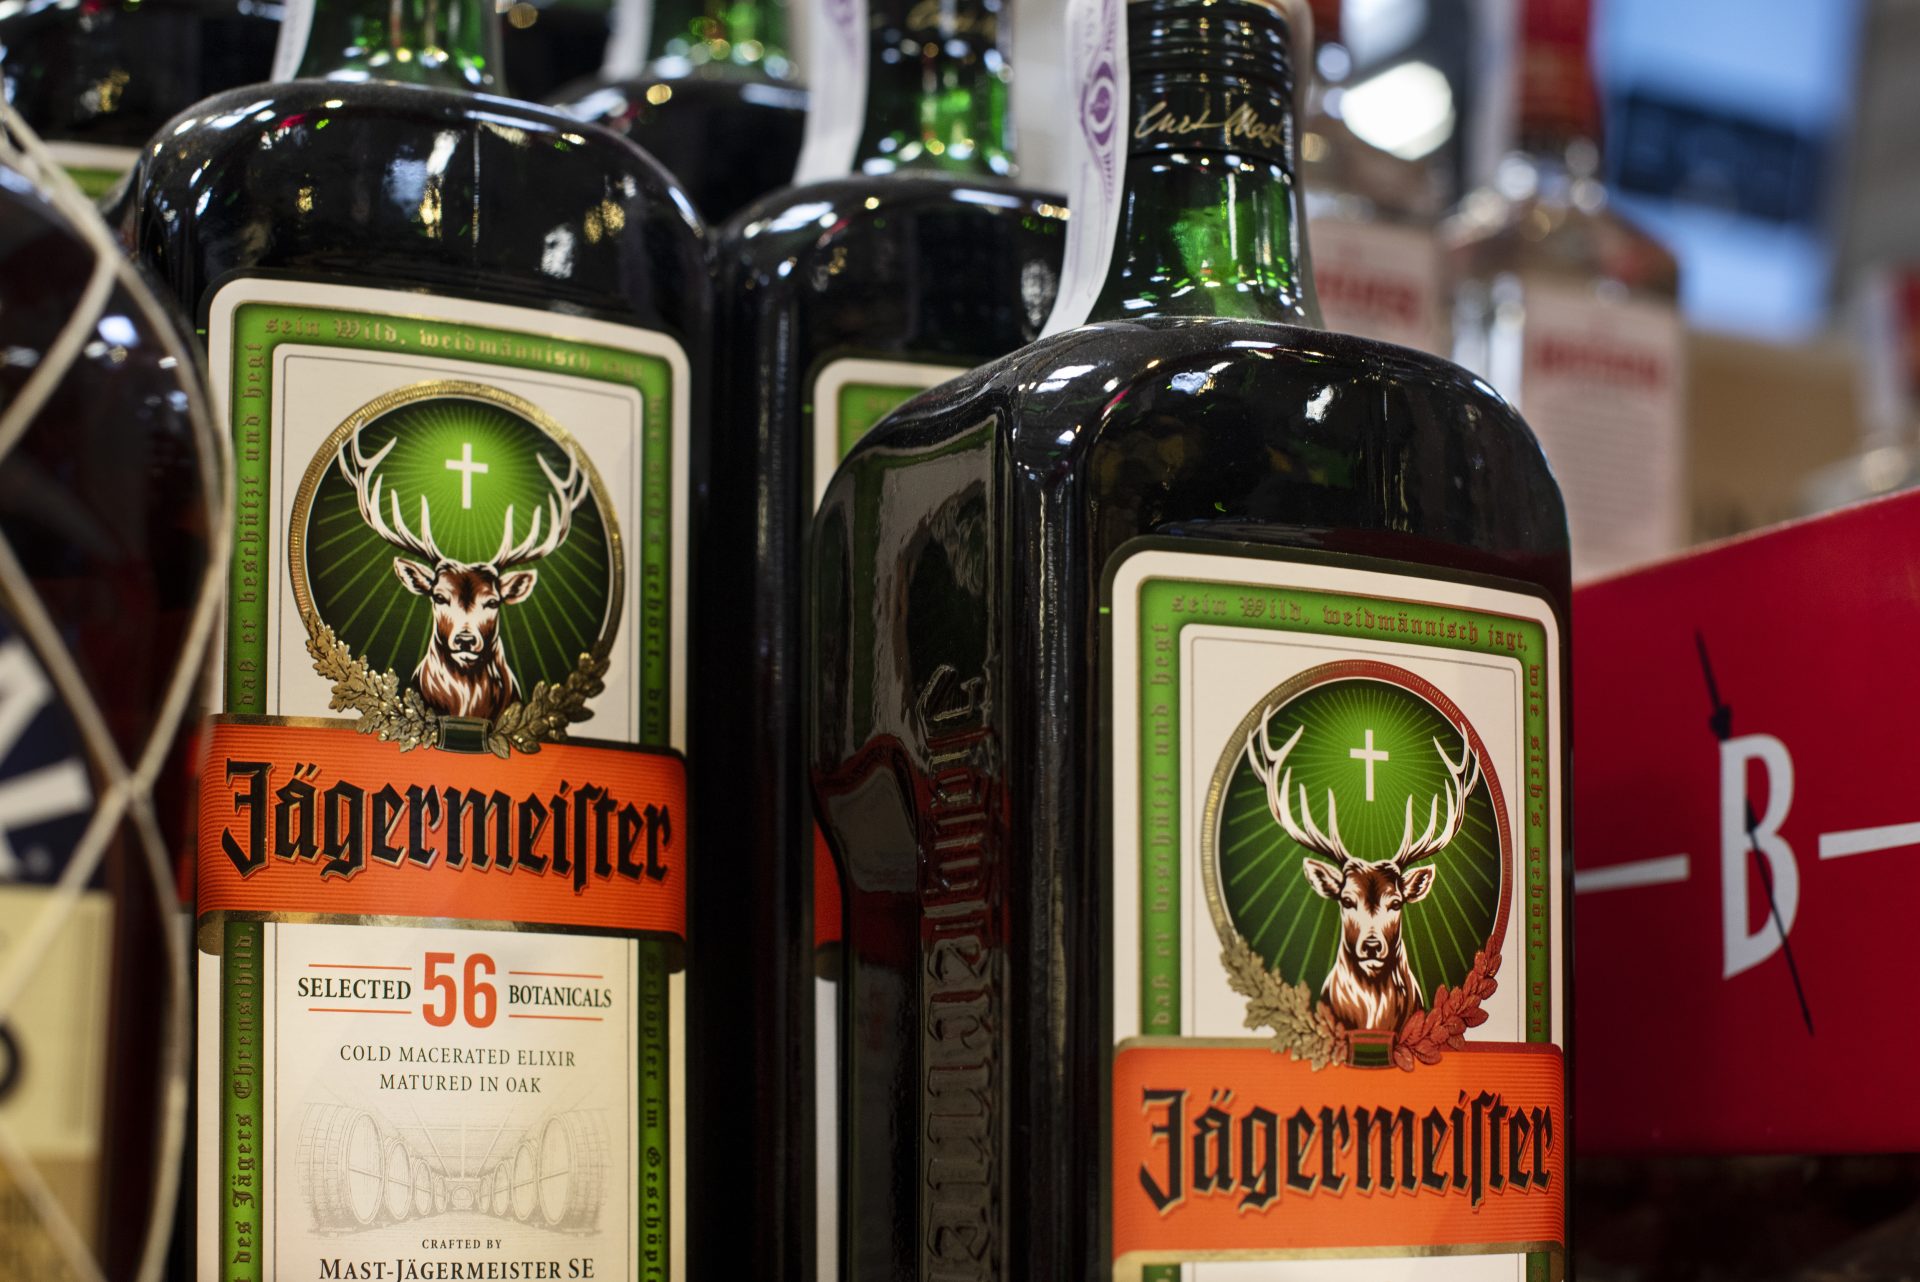 Man Dies After Chugging Bottle Of Jagermeister In Two Minutes To Win $12 Drinking Challenge